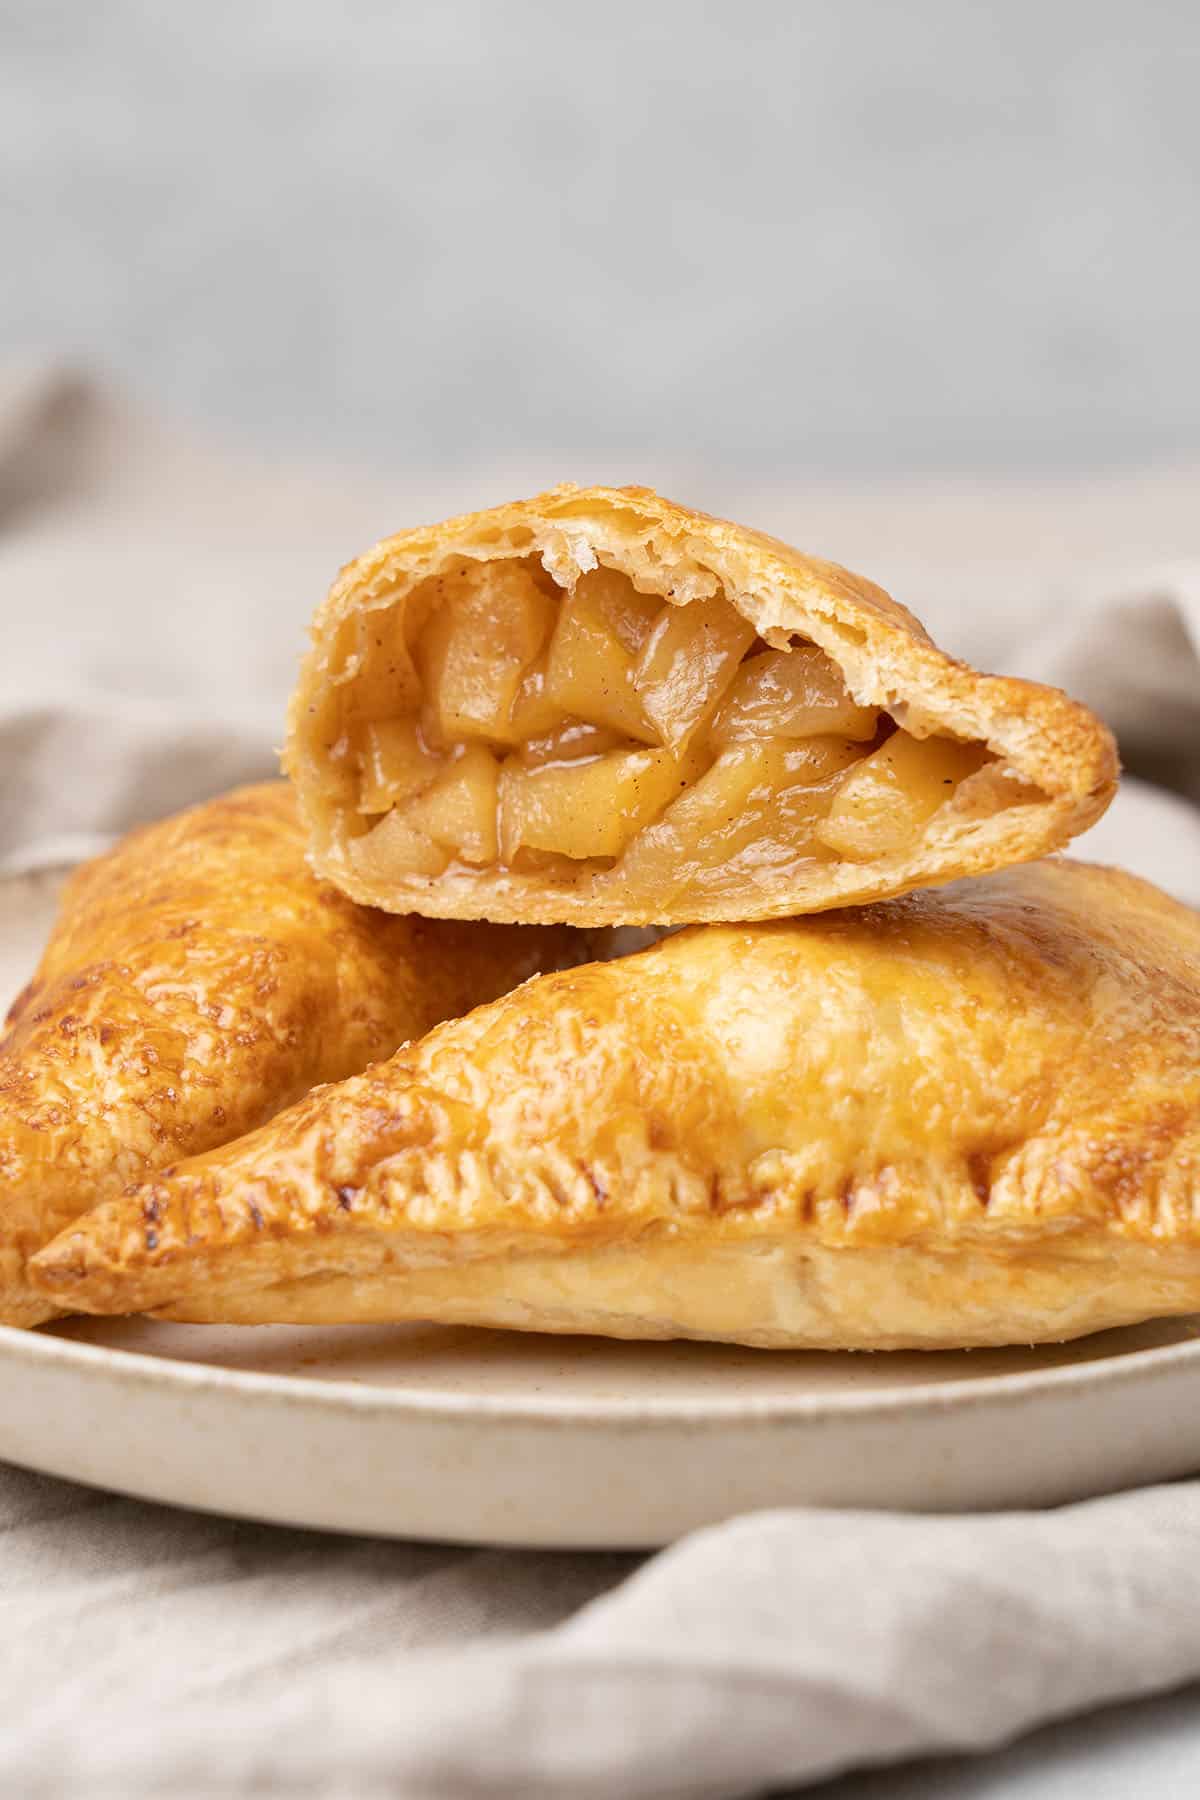 3 apple turnover on a a plate.